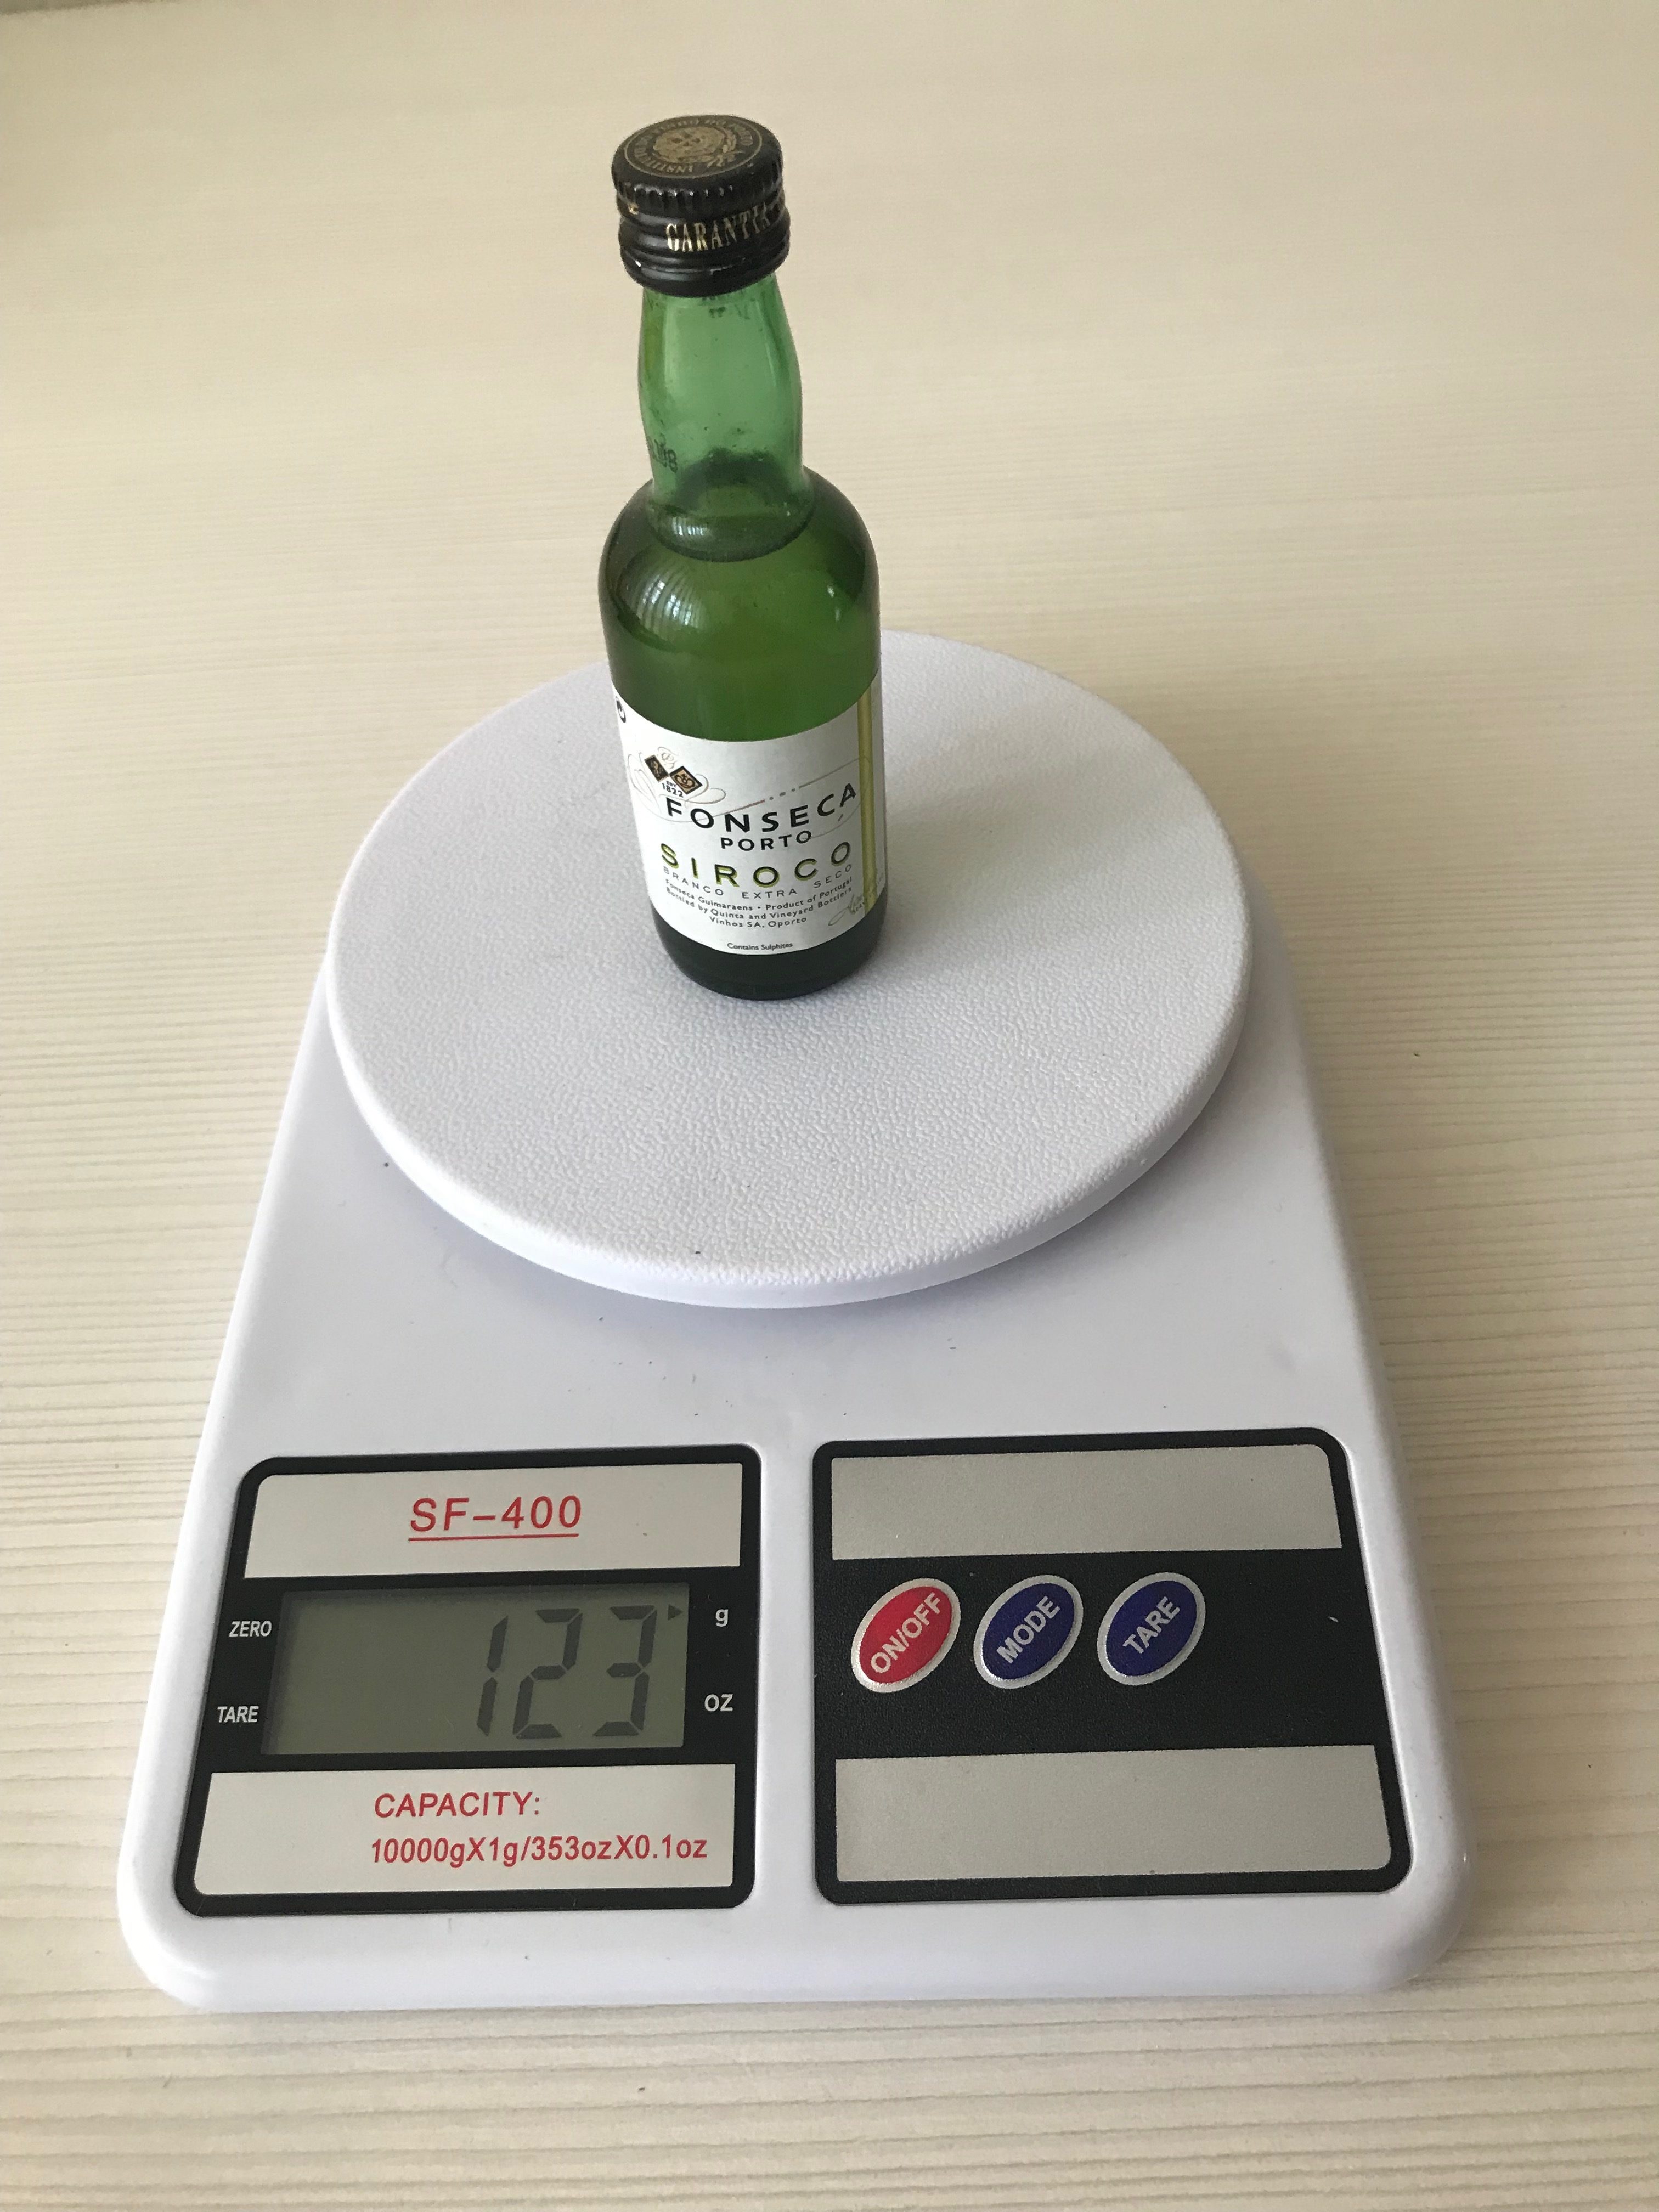 How much does the mini bottle from the bar weigh?